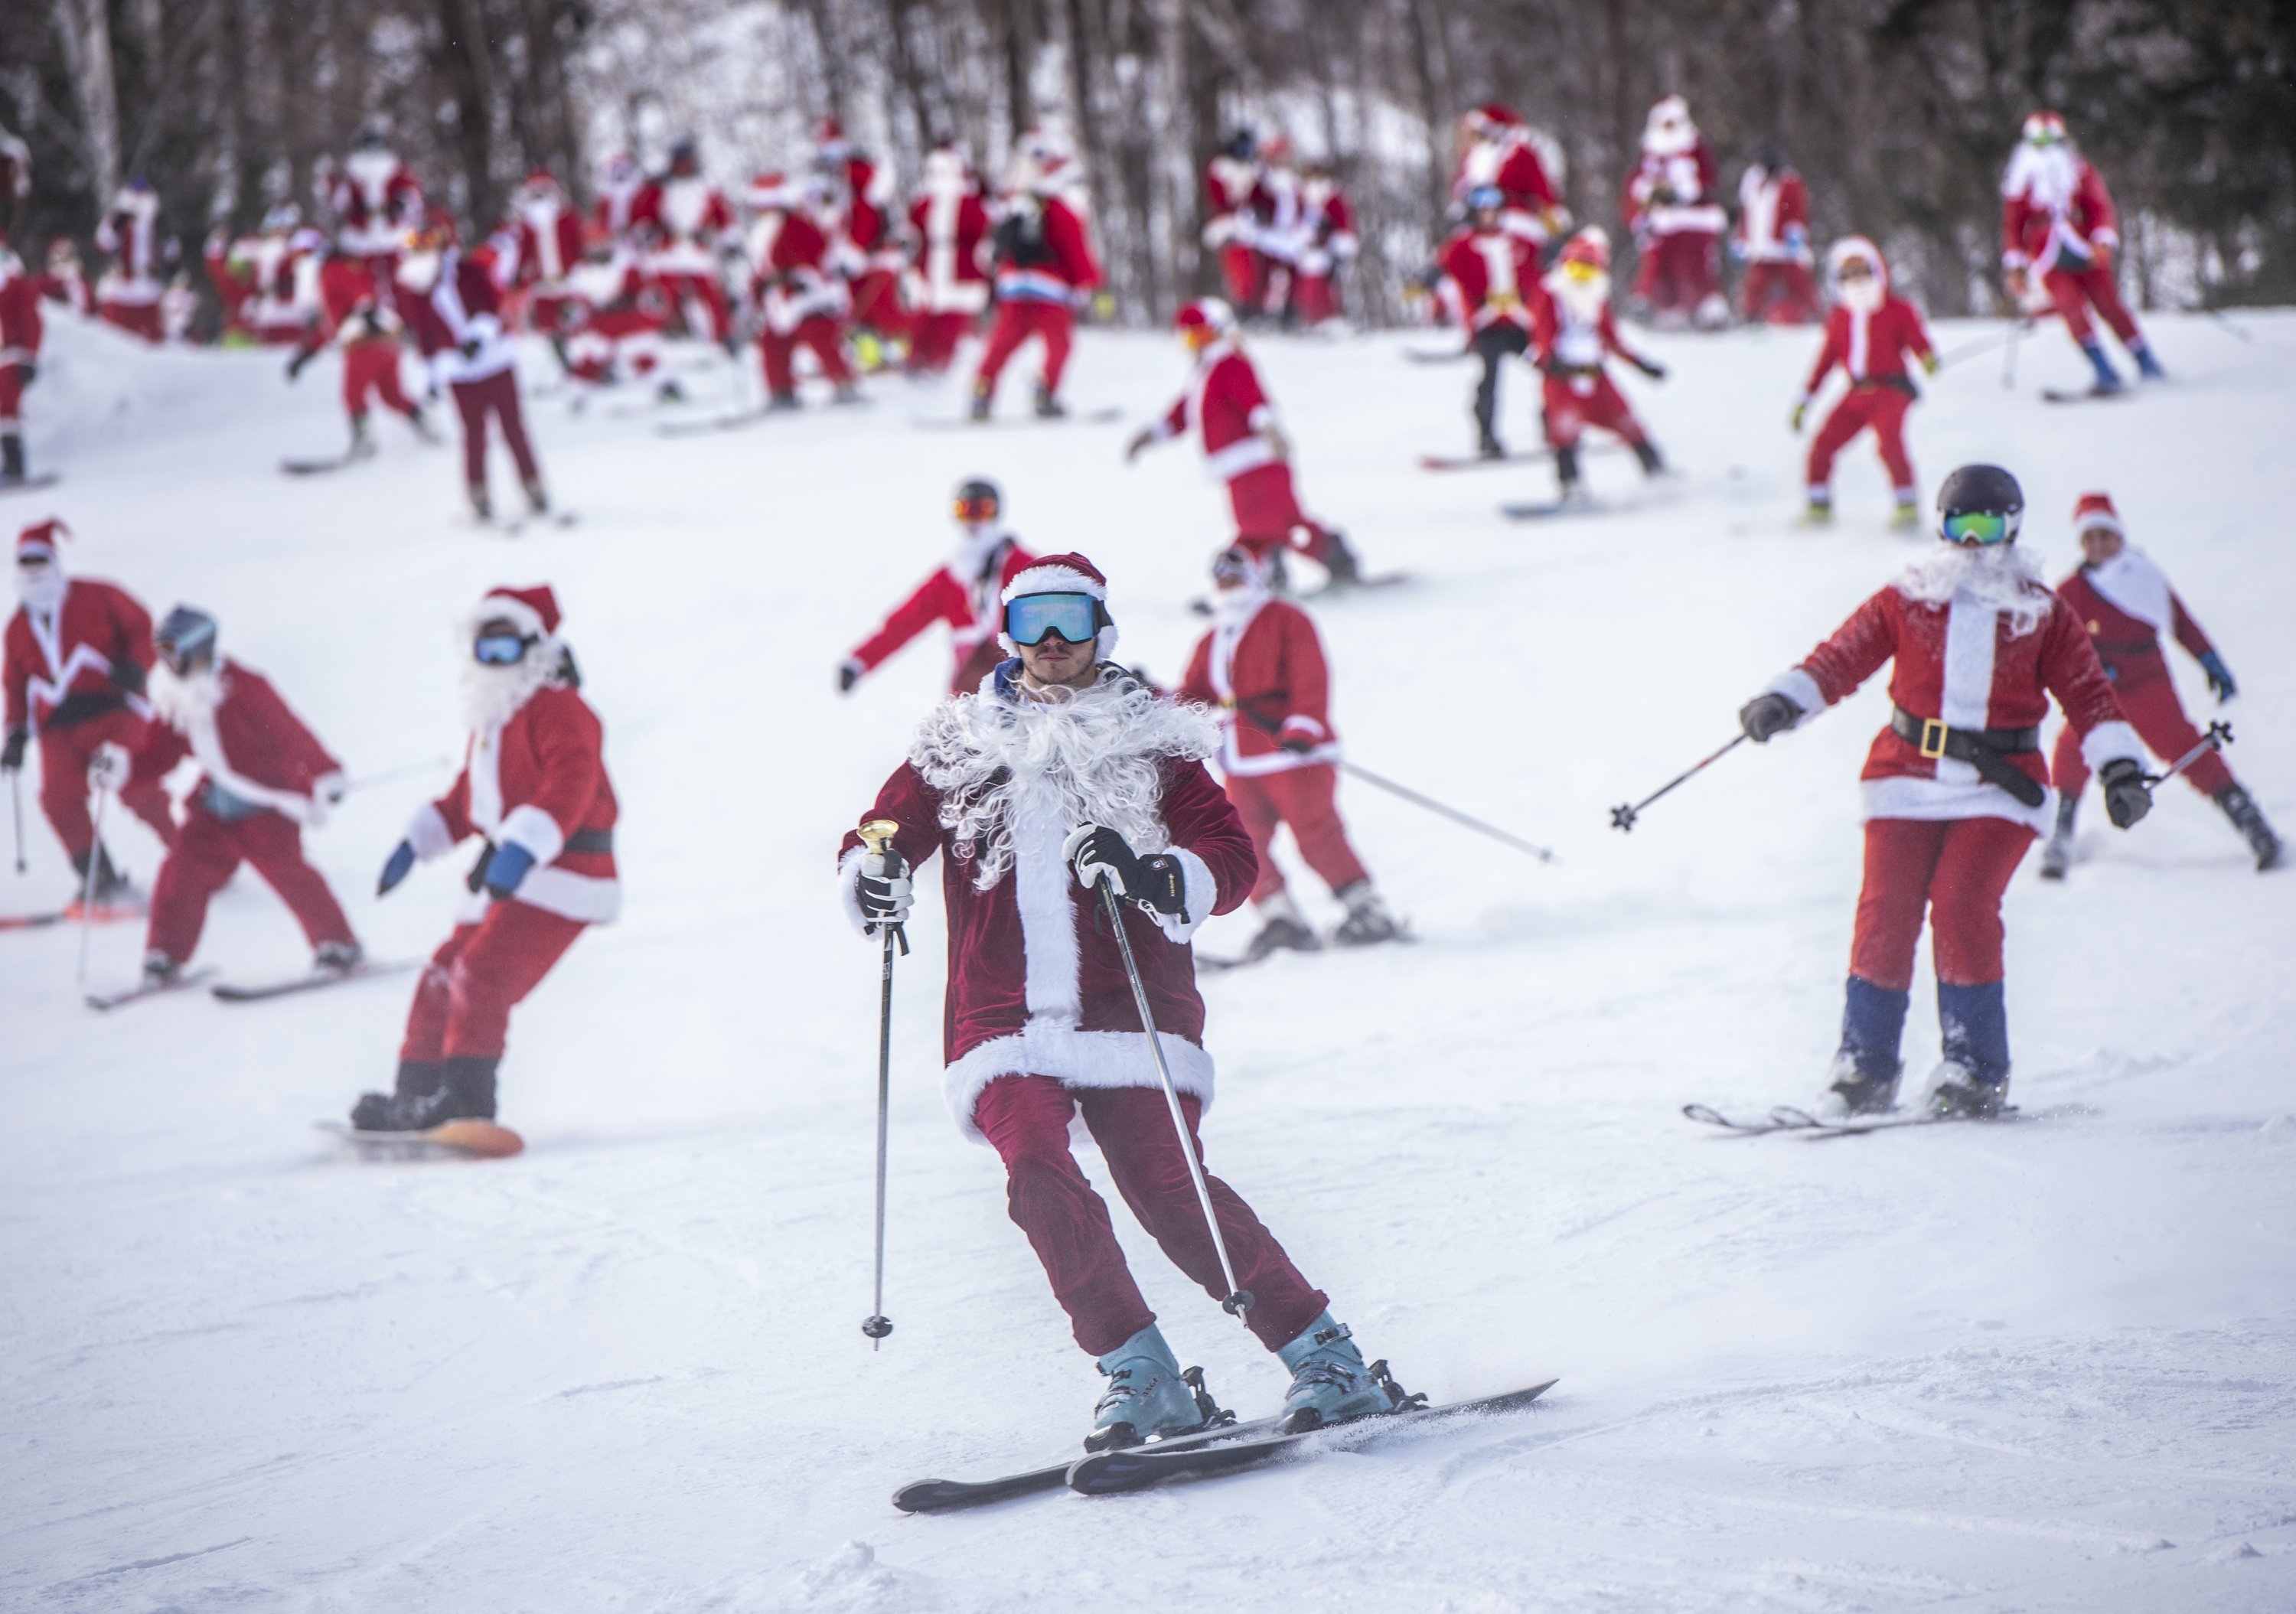 Skiers and snowboarders hit the slopes Sunday at Sunday River Ski Resort in Newry, Maine, U.S., Dec. 5, 2021. (Andree Kehn/Sun Journal via AP)